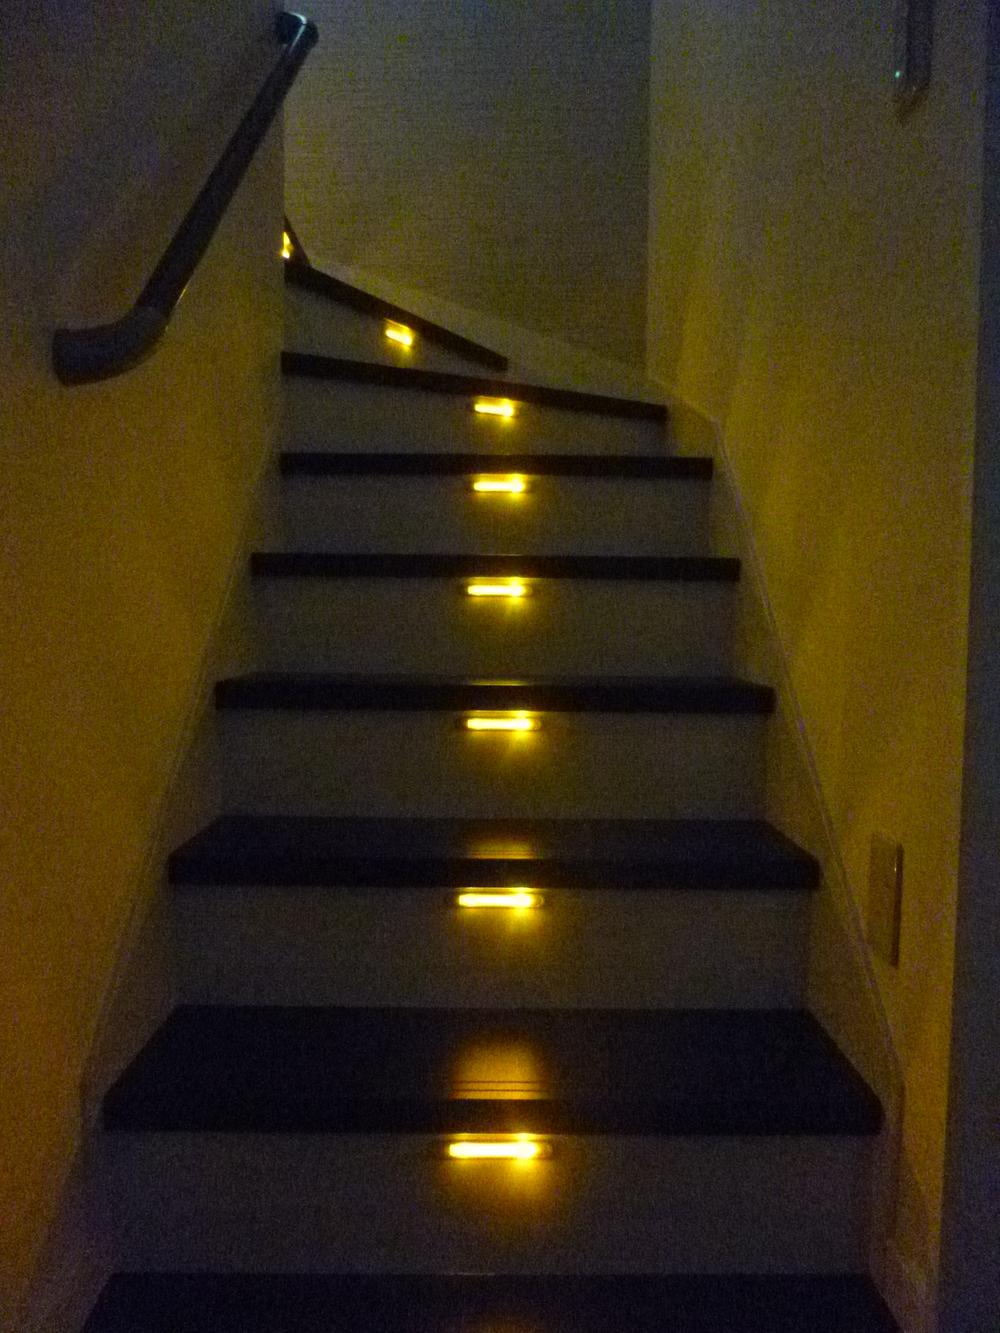 Other introspection. Stairs spot lights